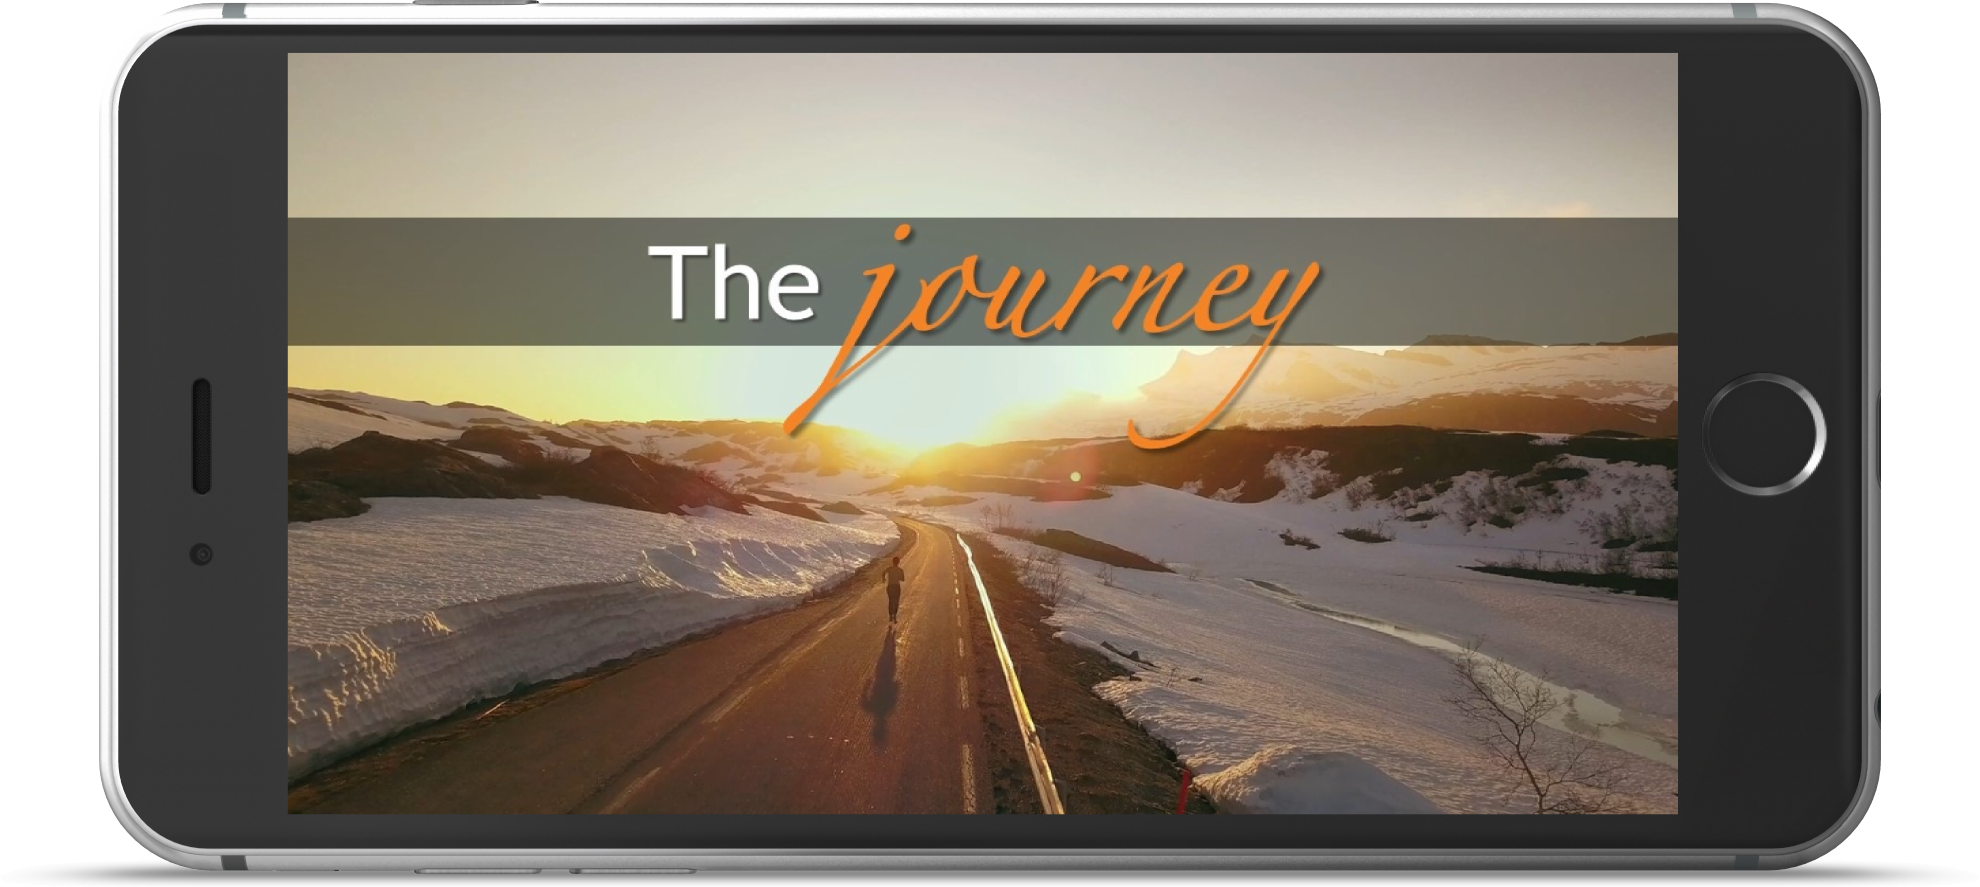 The Journey video - Cover image